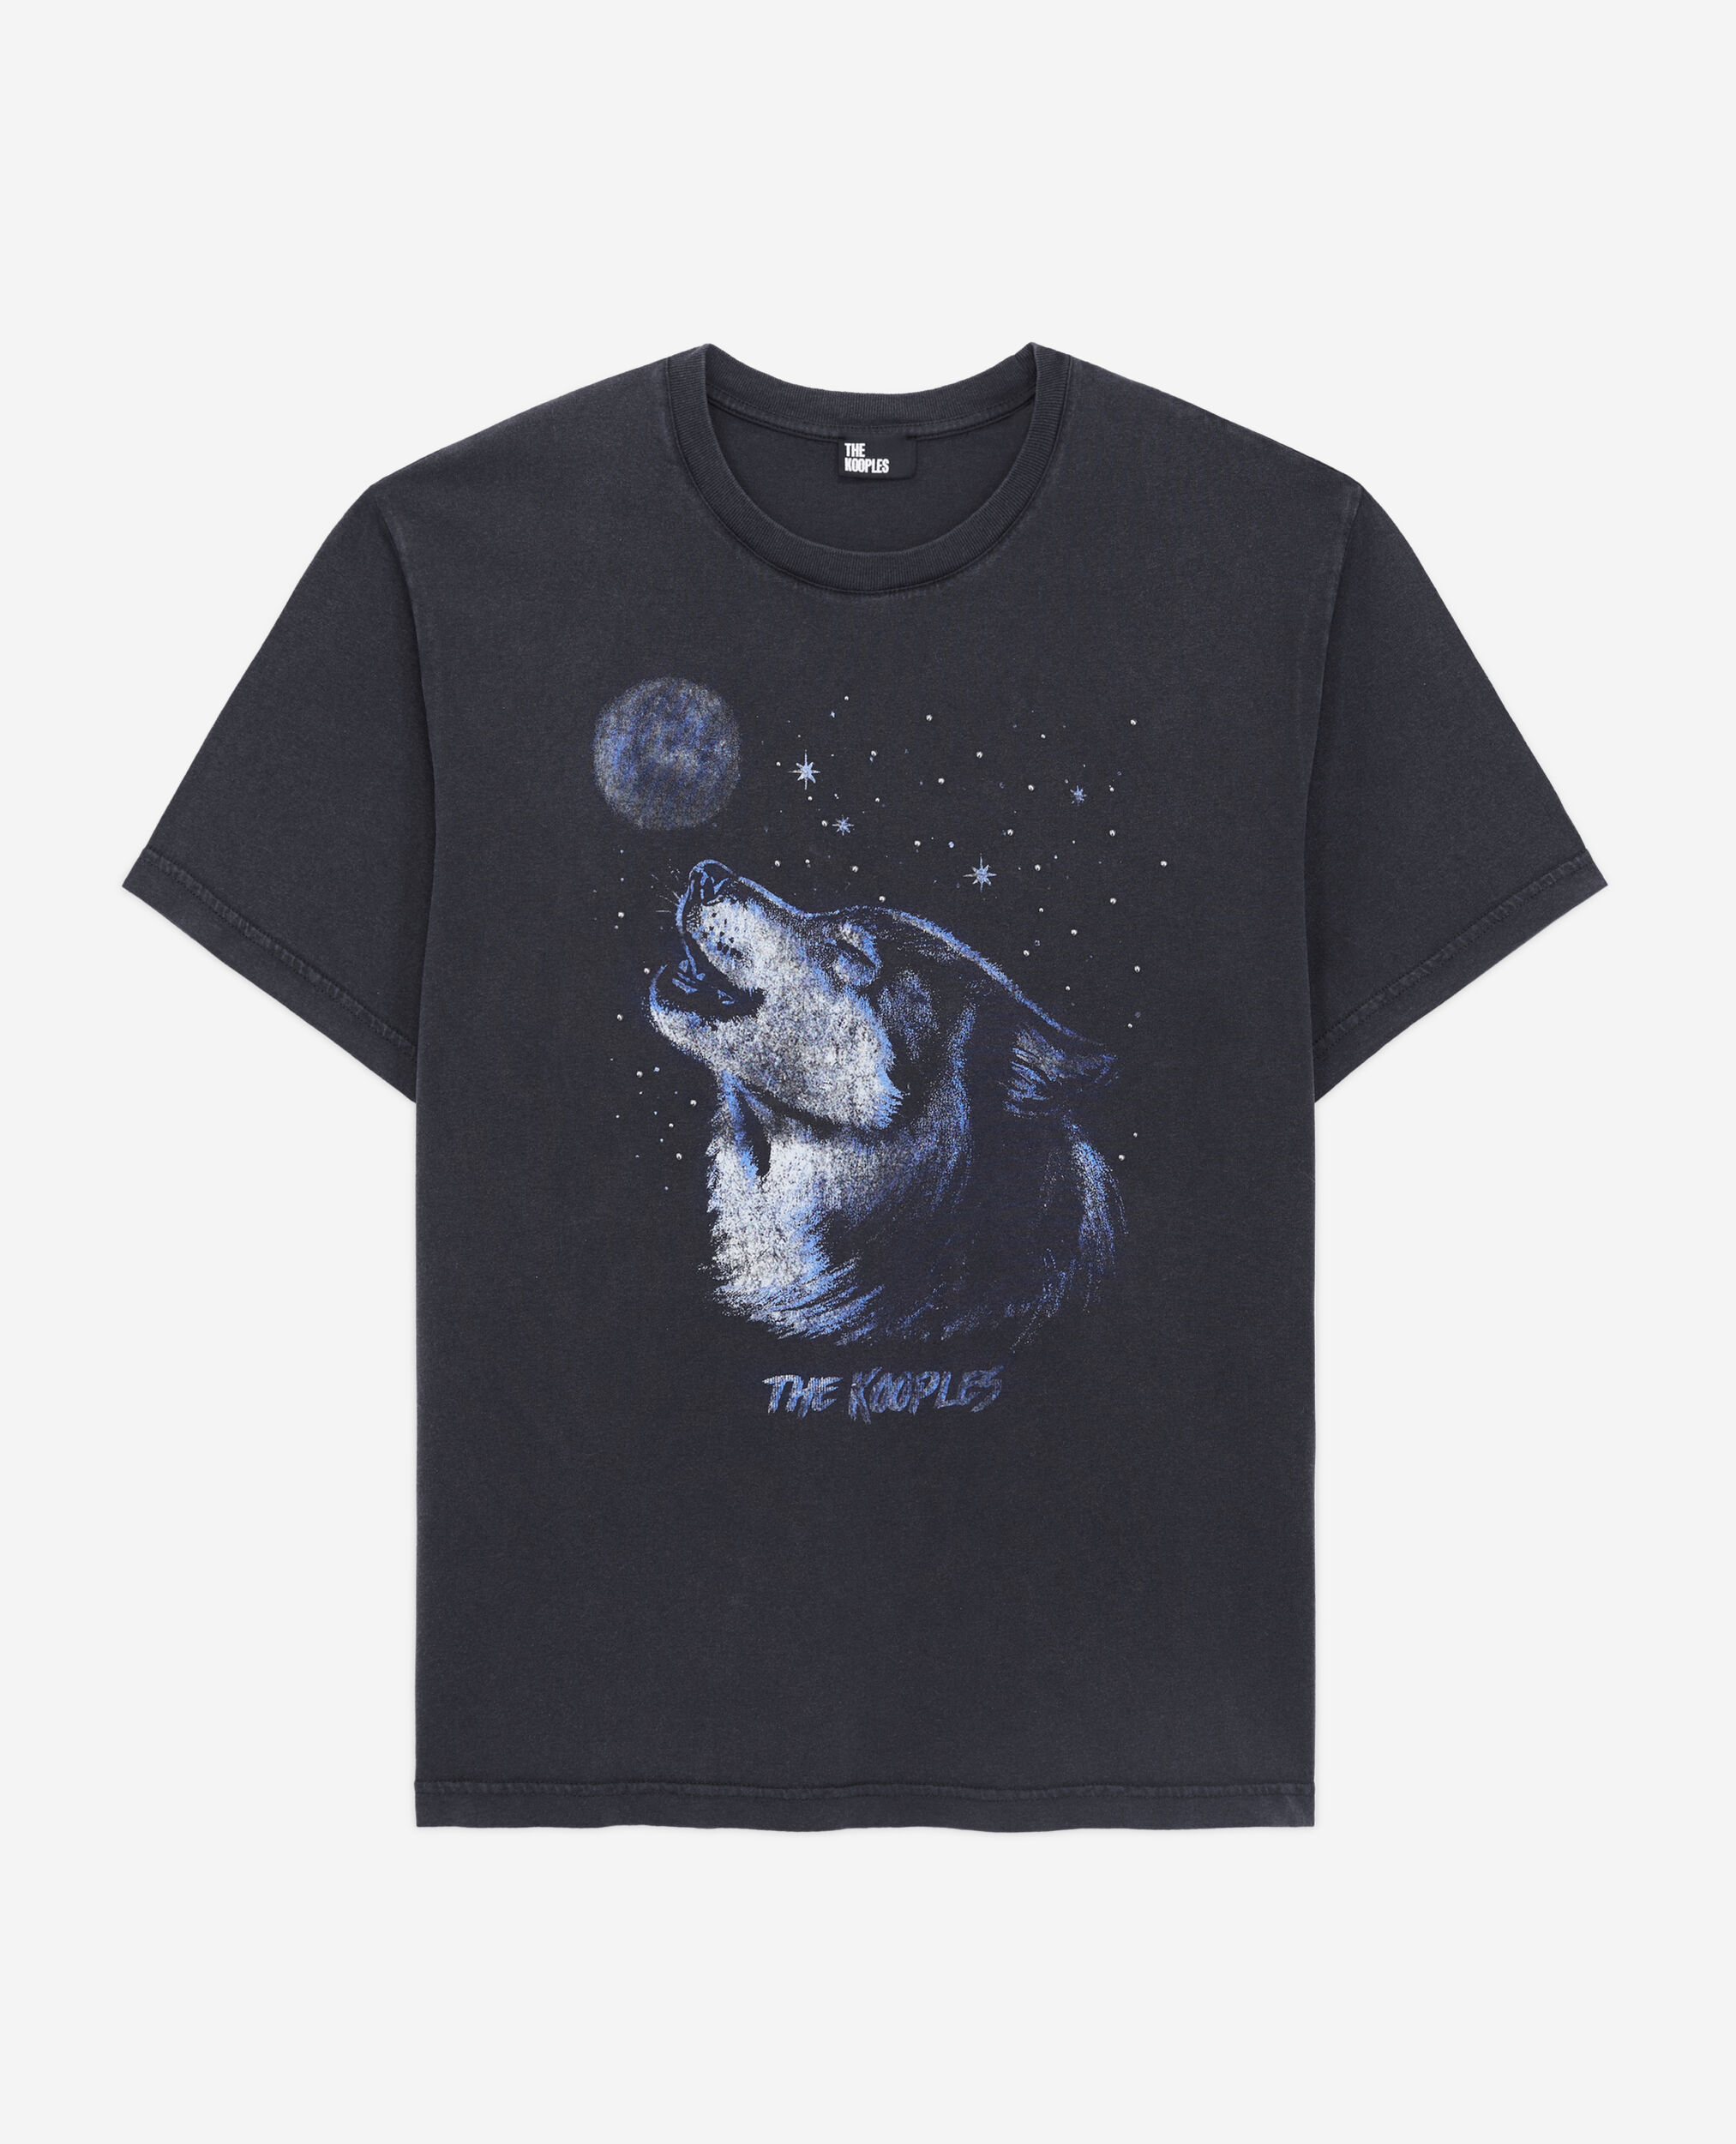 Women's black t-shirt with wolf serigraphy, BLACK WASHED, hi-res image number null